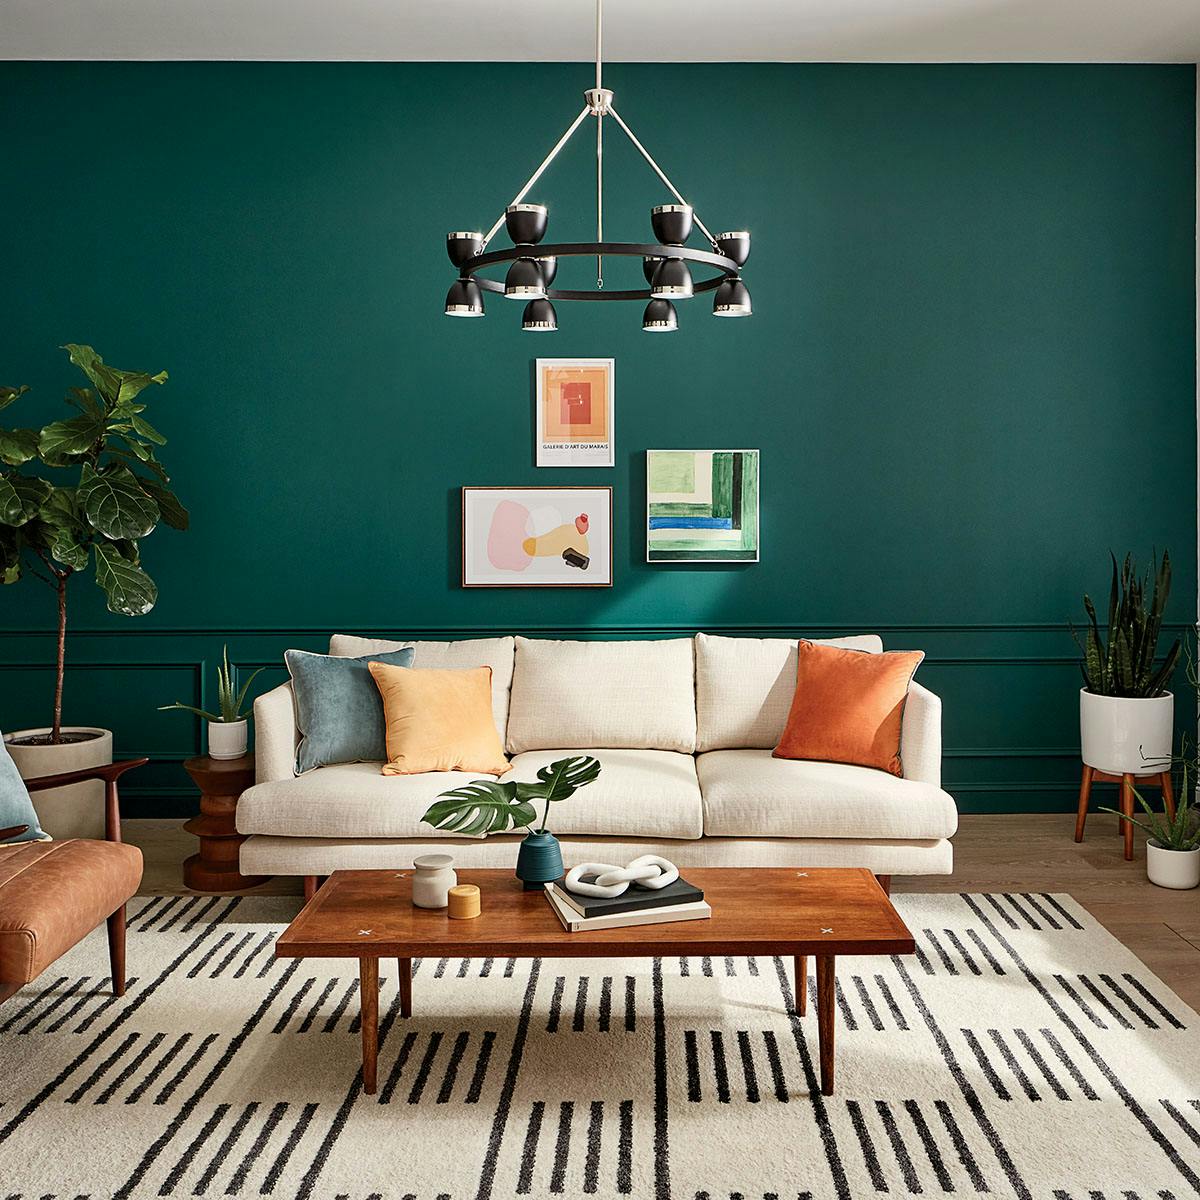 Day time Living Room image featuring Baland 52418BK